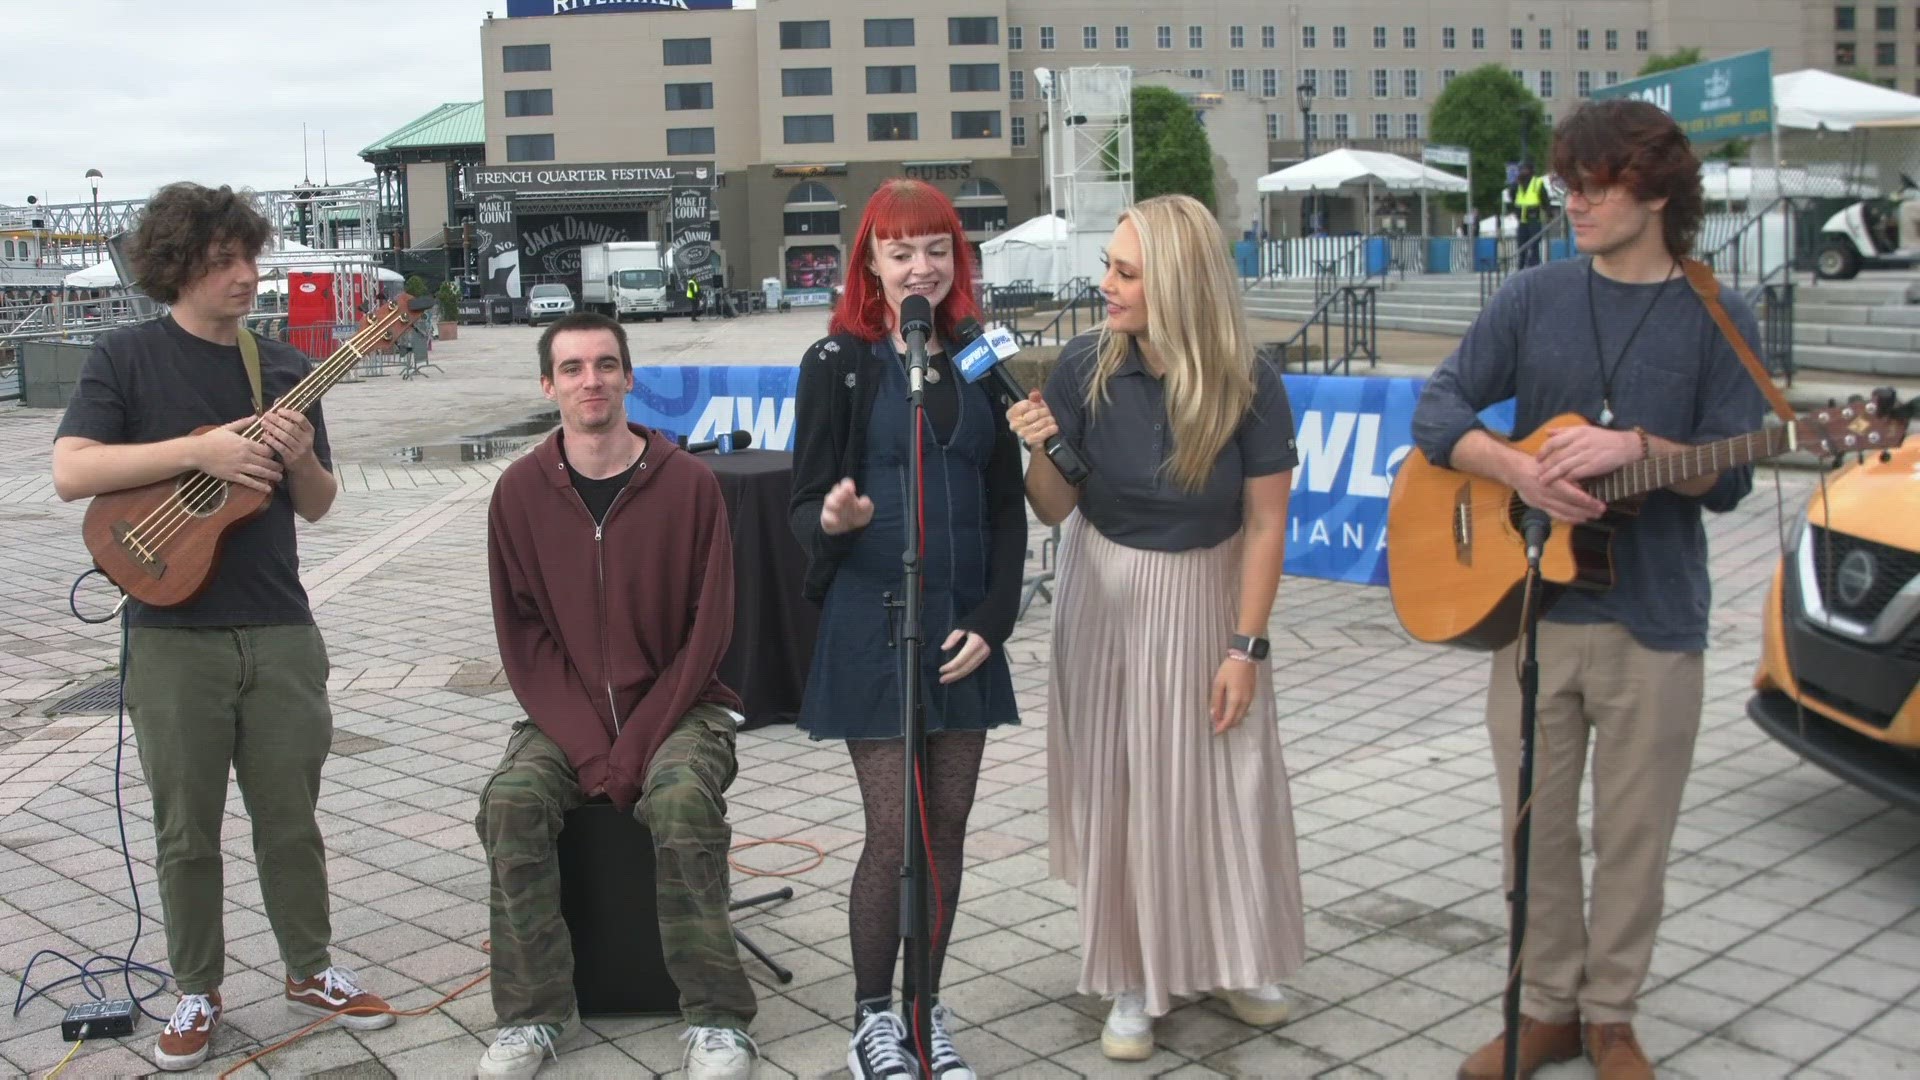 WWL Louisiana's Brheanna Boudreaux talks with the Loyola University student rock band The Kissing Disease on their first experience performing at the FQF.